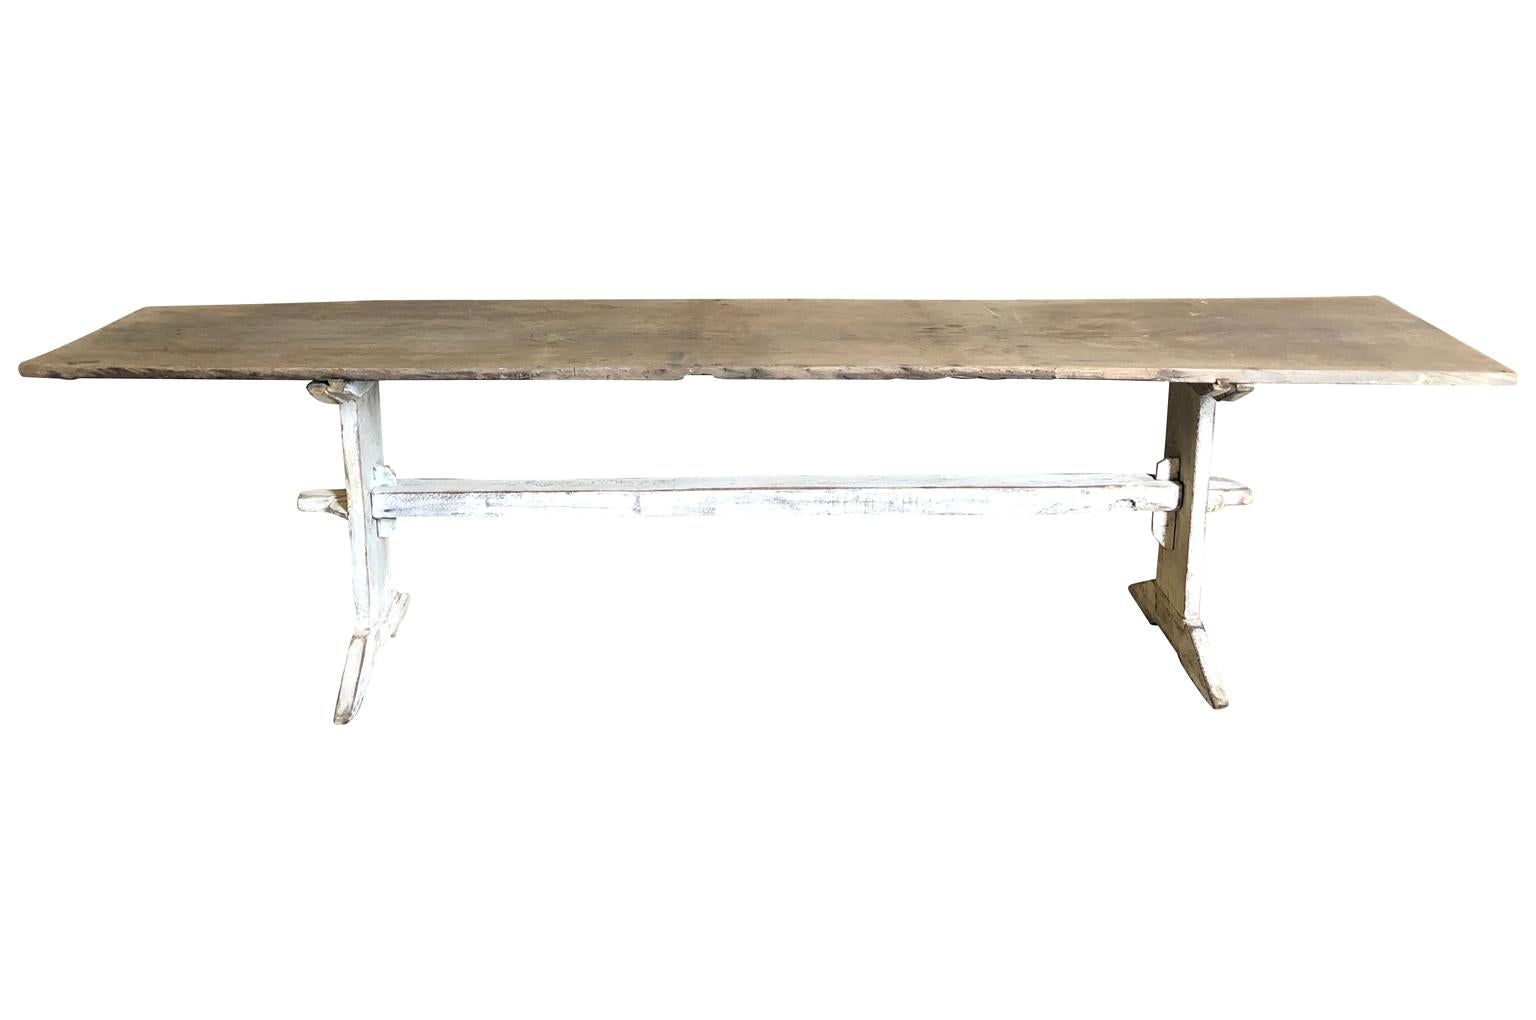 A very handsome primitive console table from Northern Italy. Soundly constructed from oak with a naturally washed top and painted base. Terrific patina.